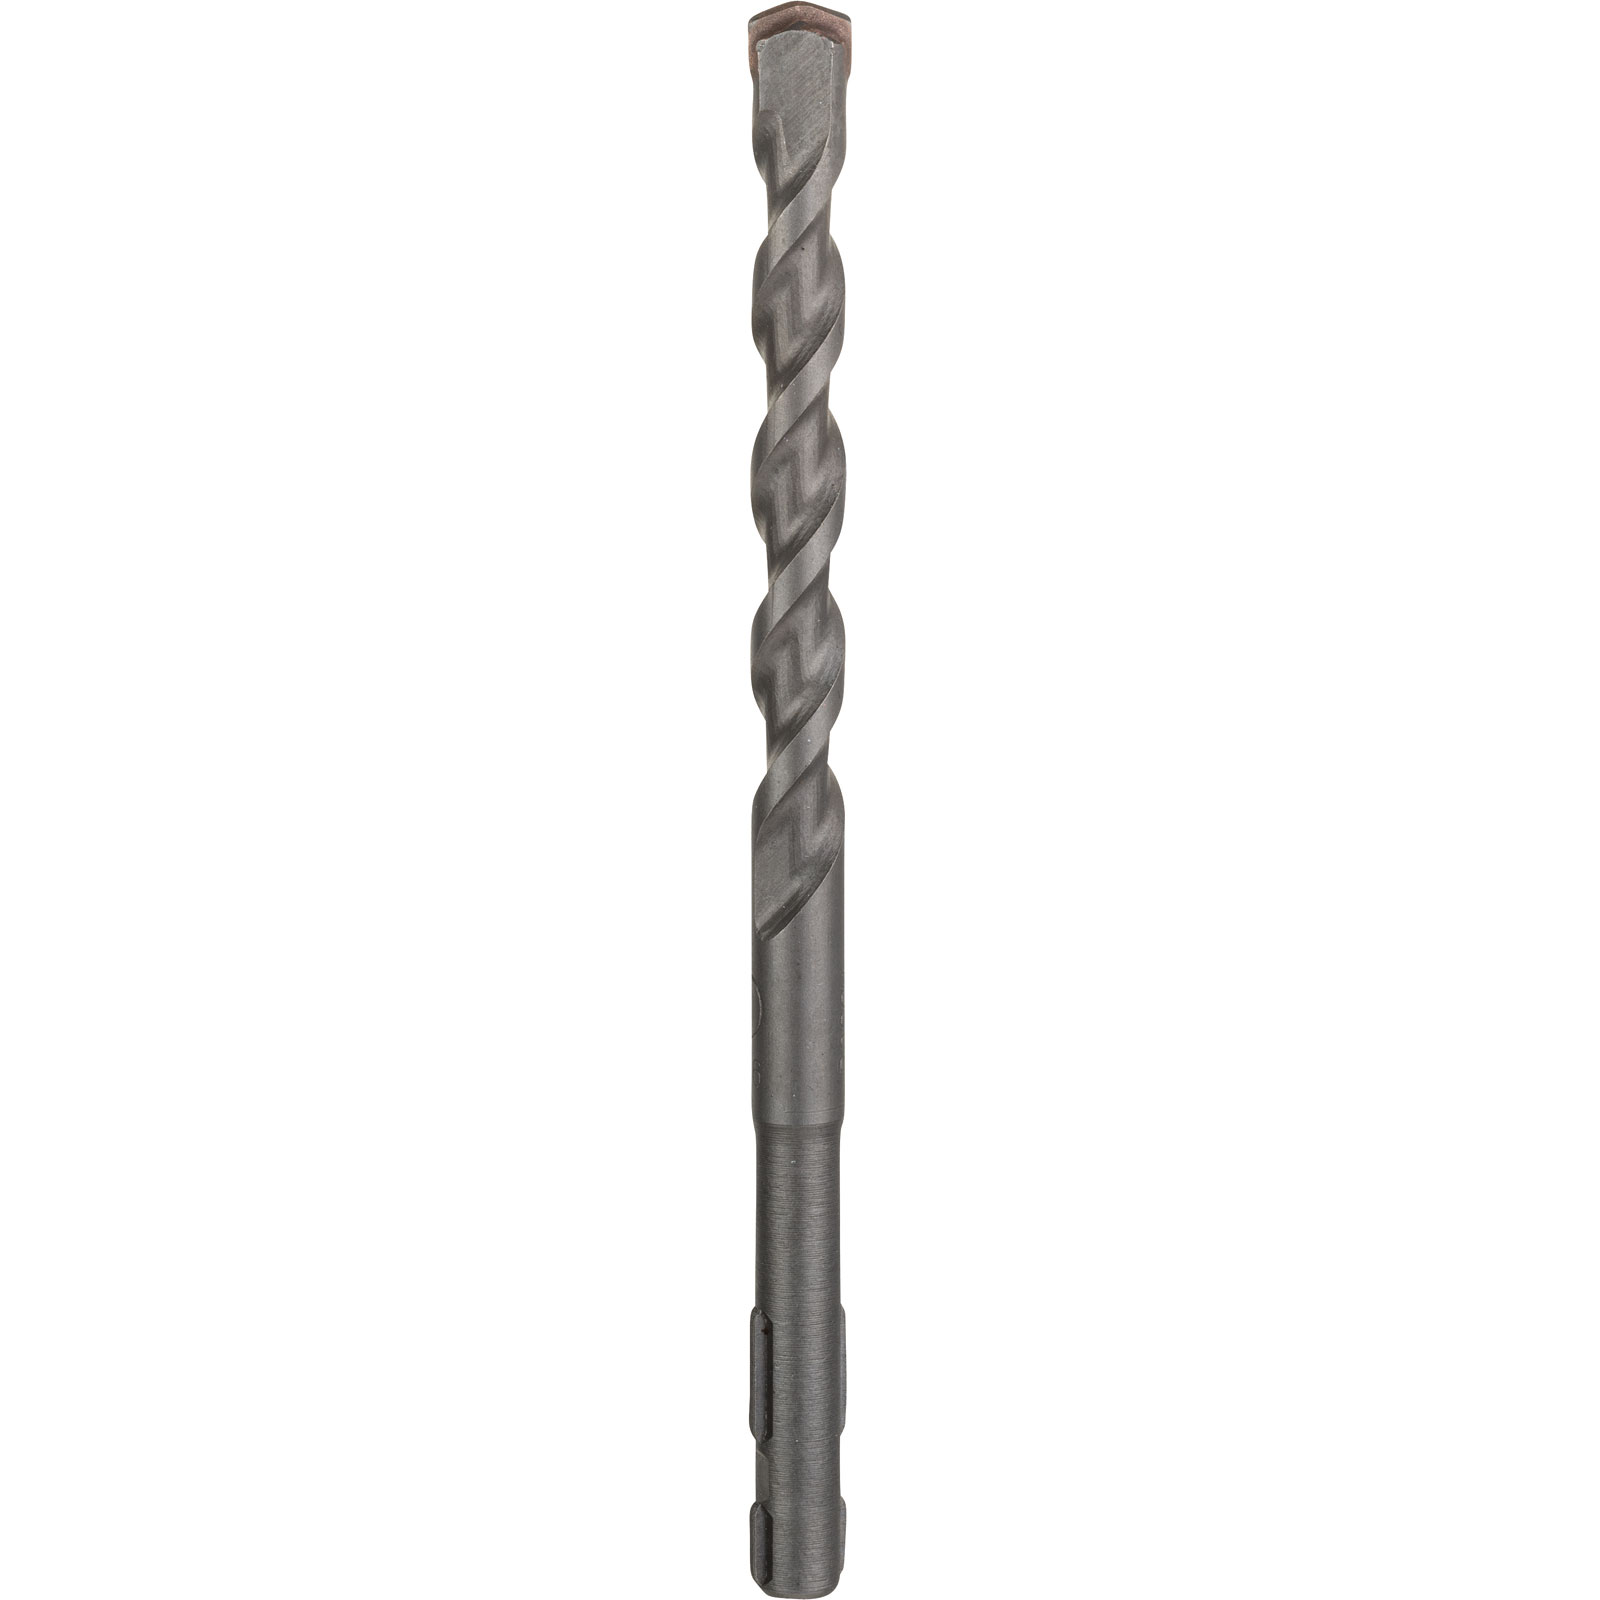 Image of Bosch UNEO SDS Quick Masonary Drill Bit 8mm 120mm Pack of 1